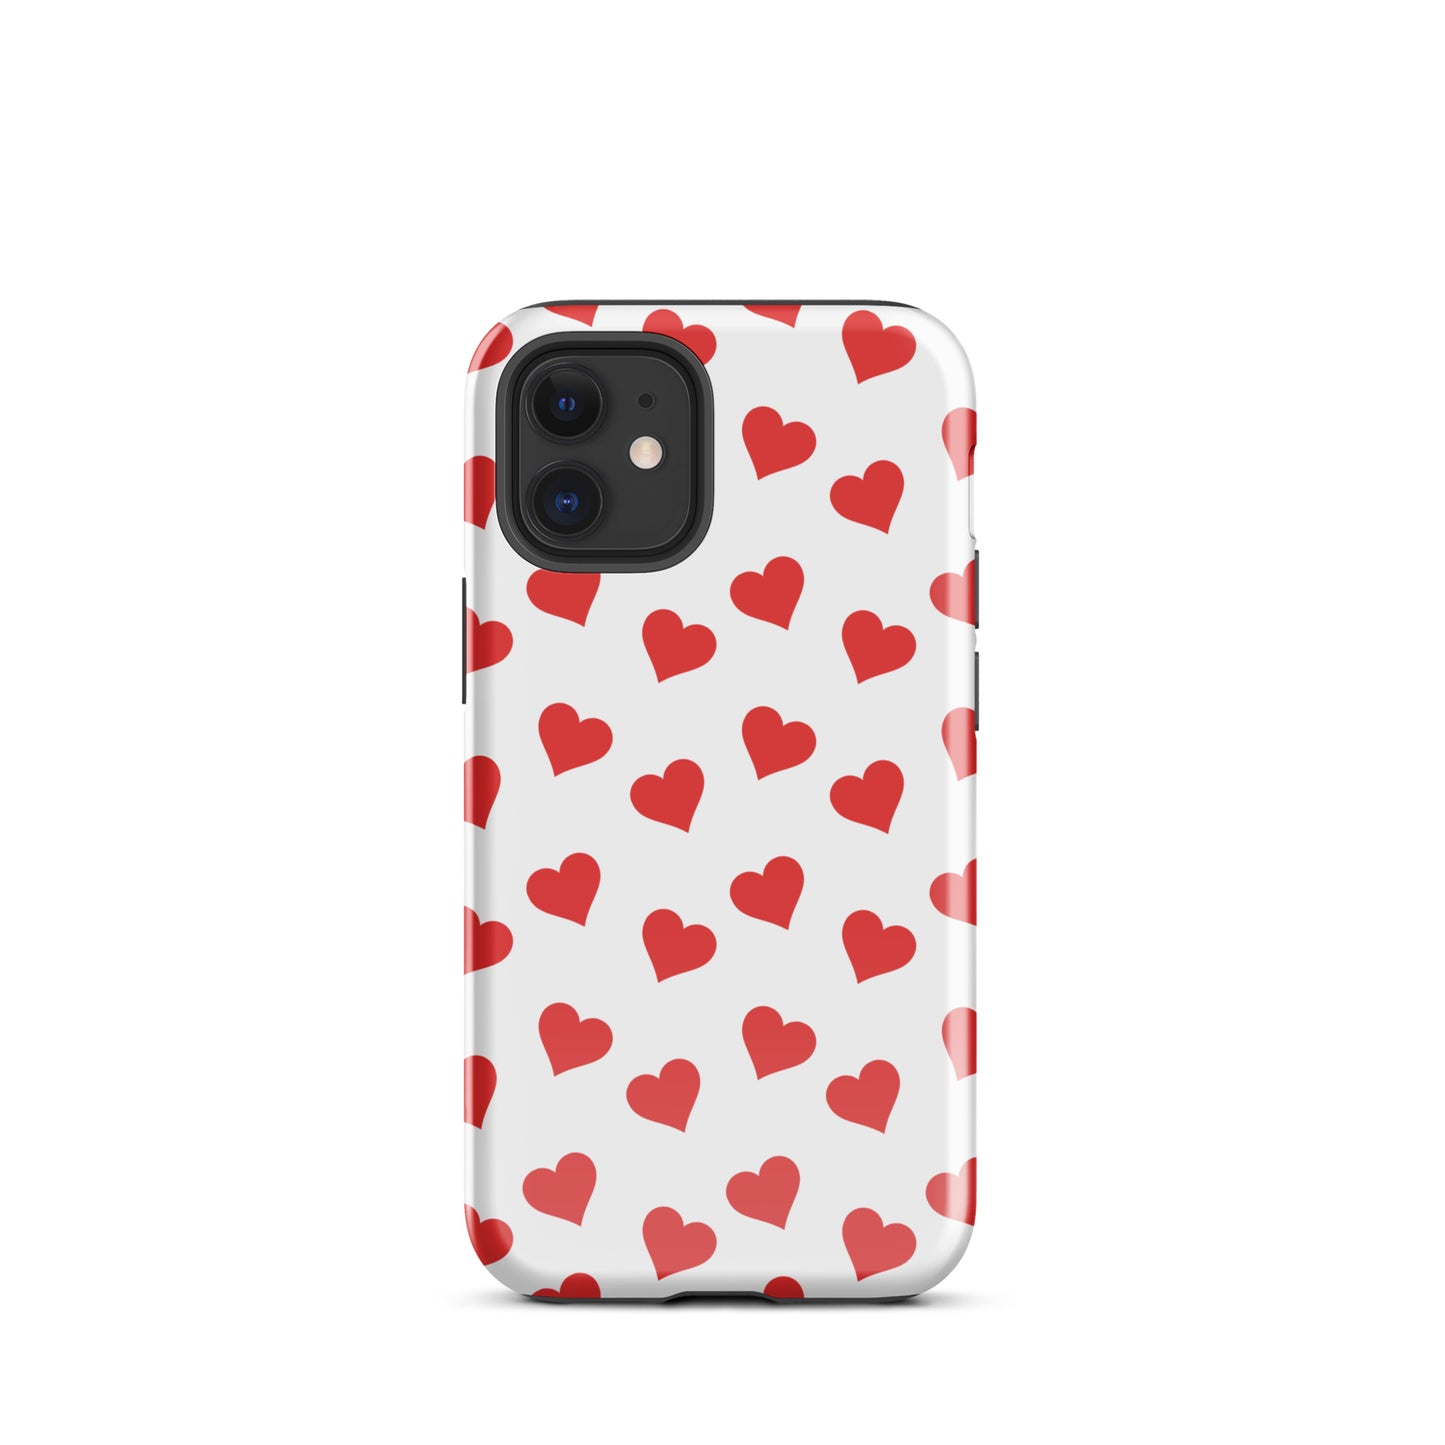 Red Heart Mania iPhone Case